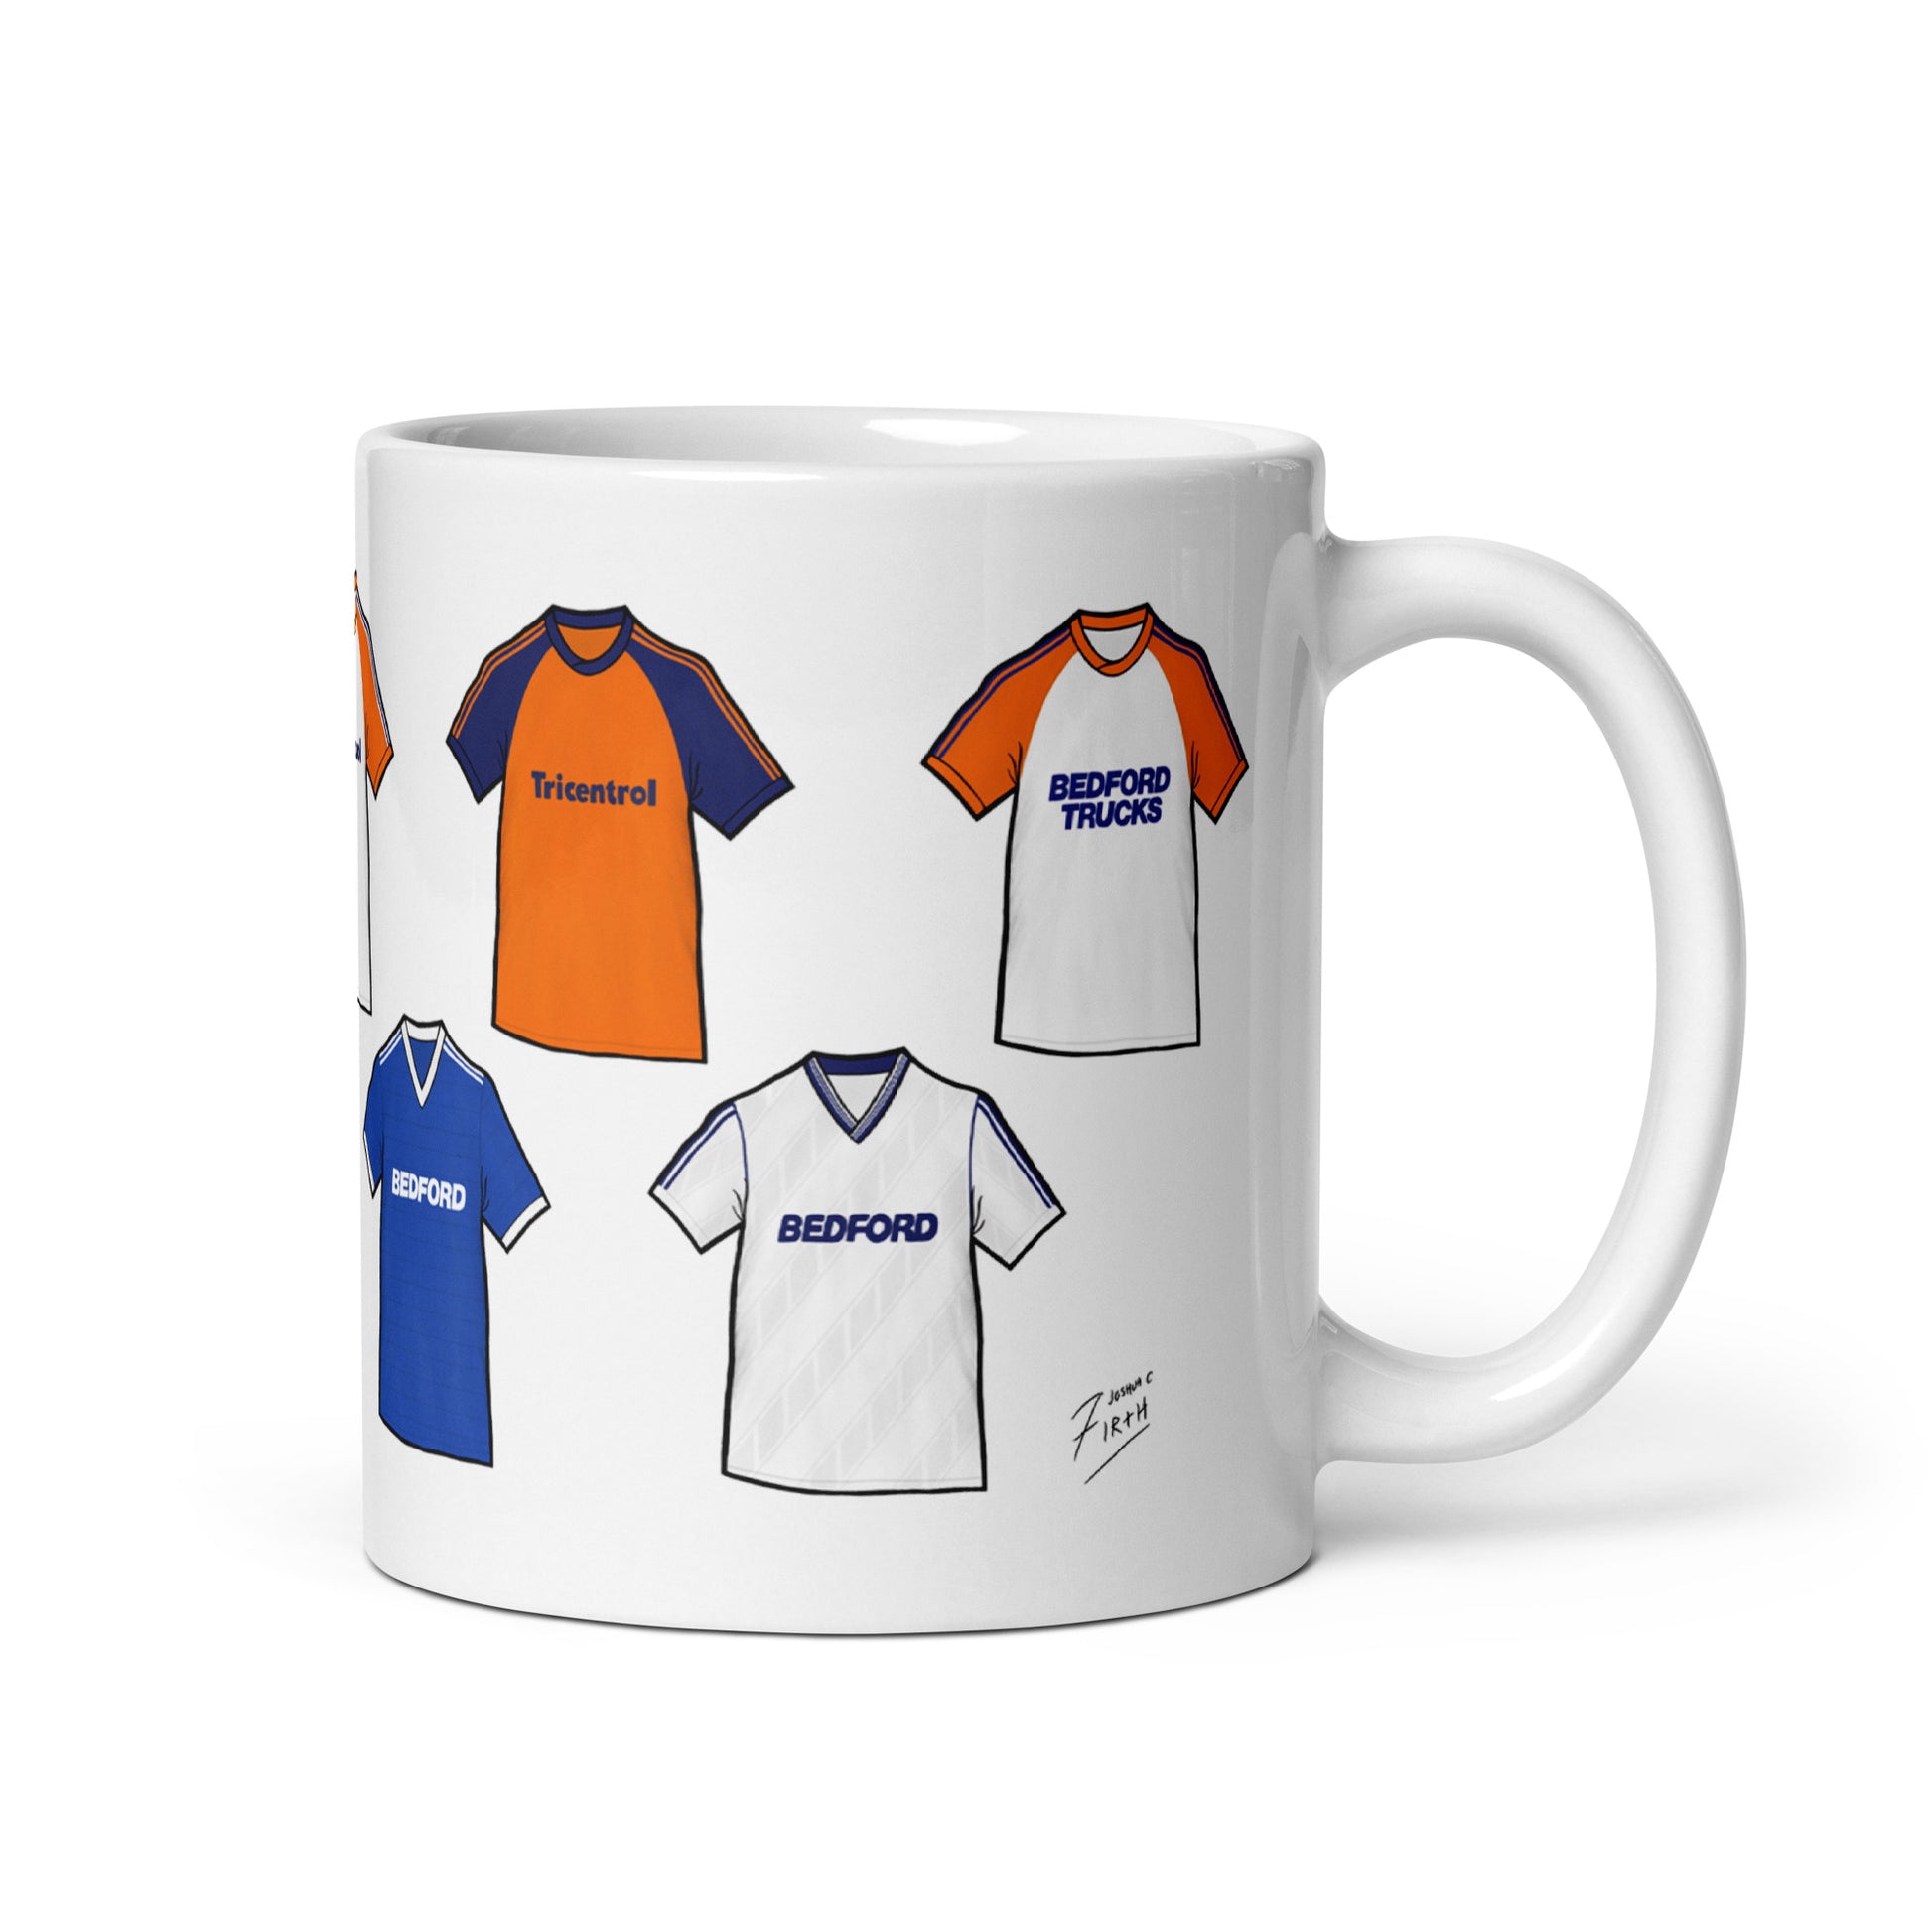 Luton Town themed retro football mug featuring some of the most iconic shirts in the Hatters history